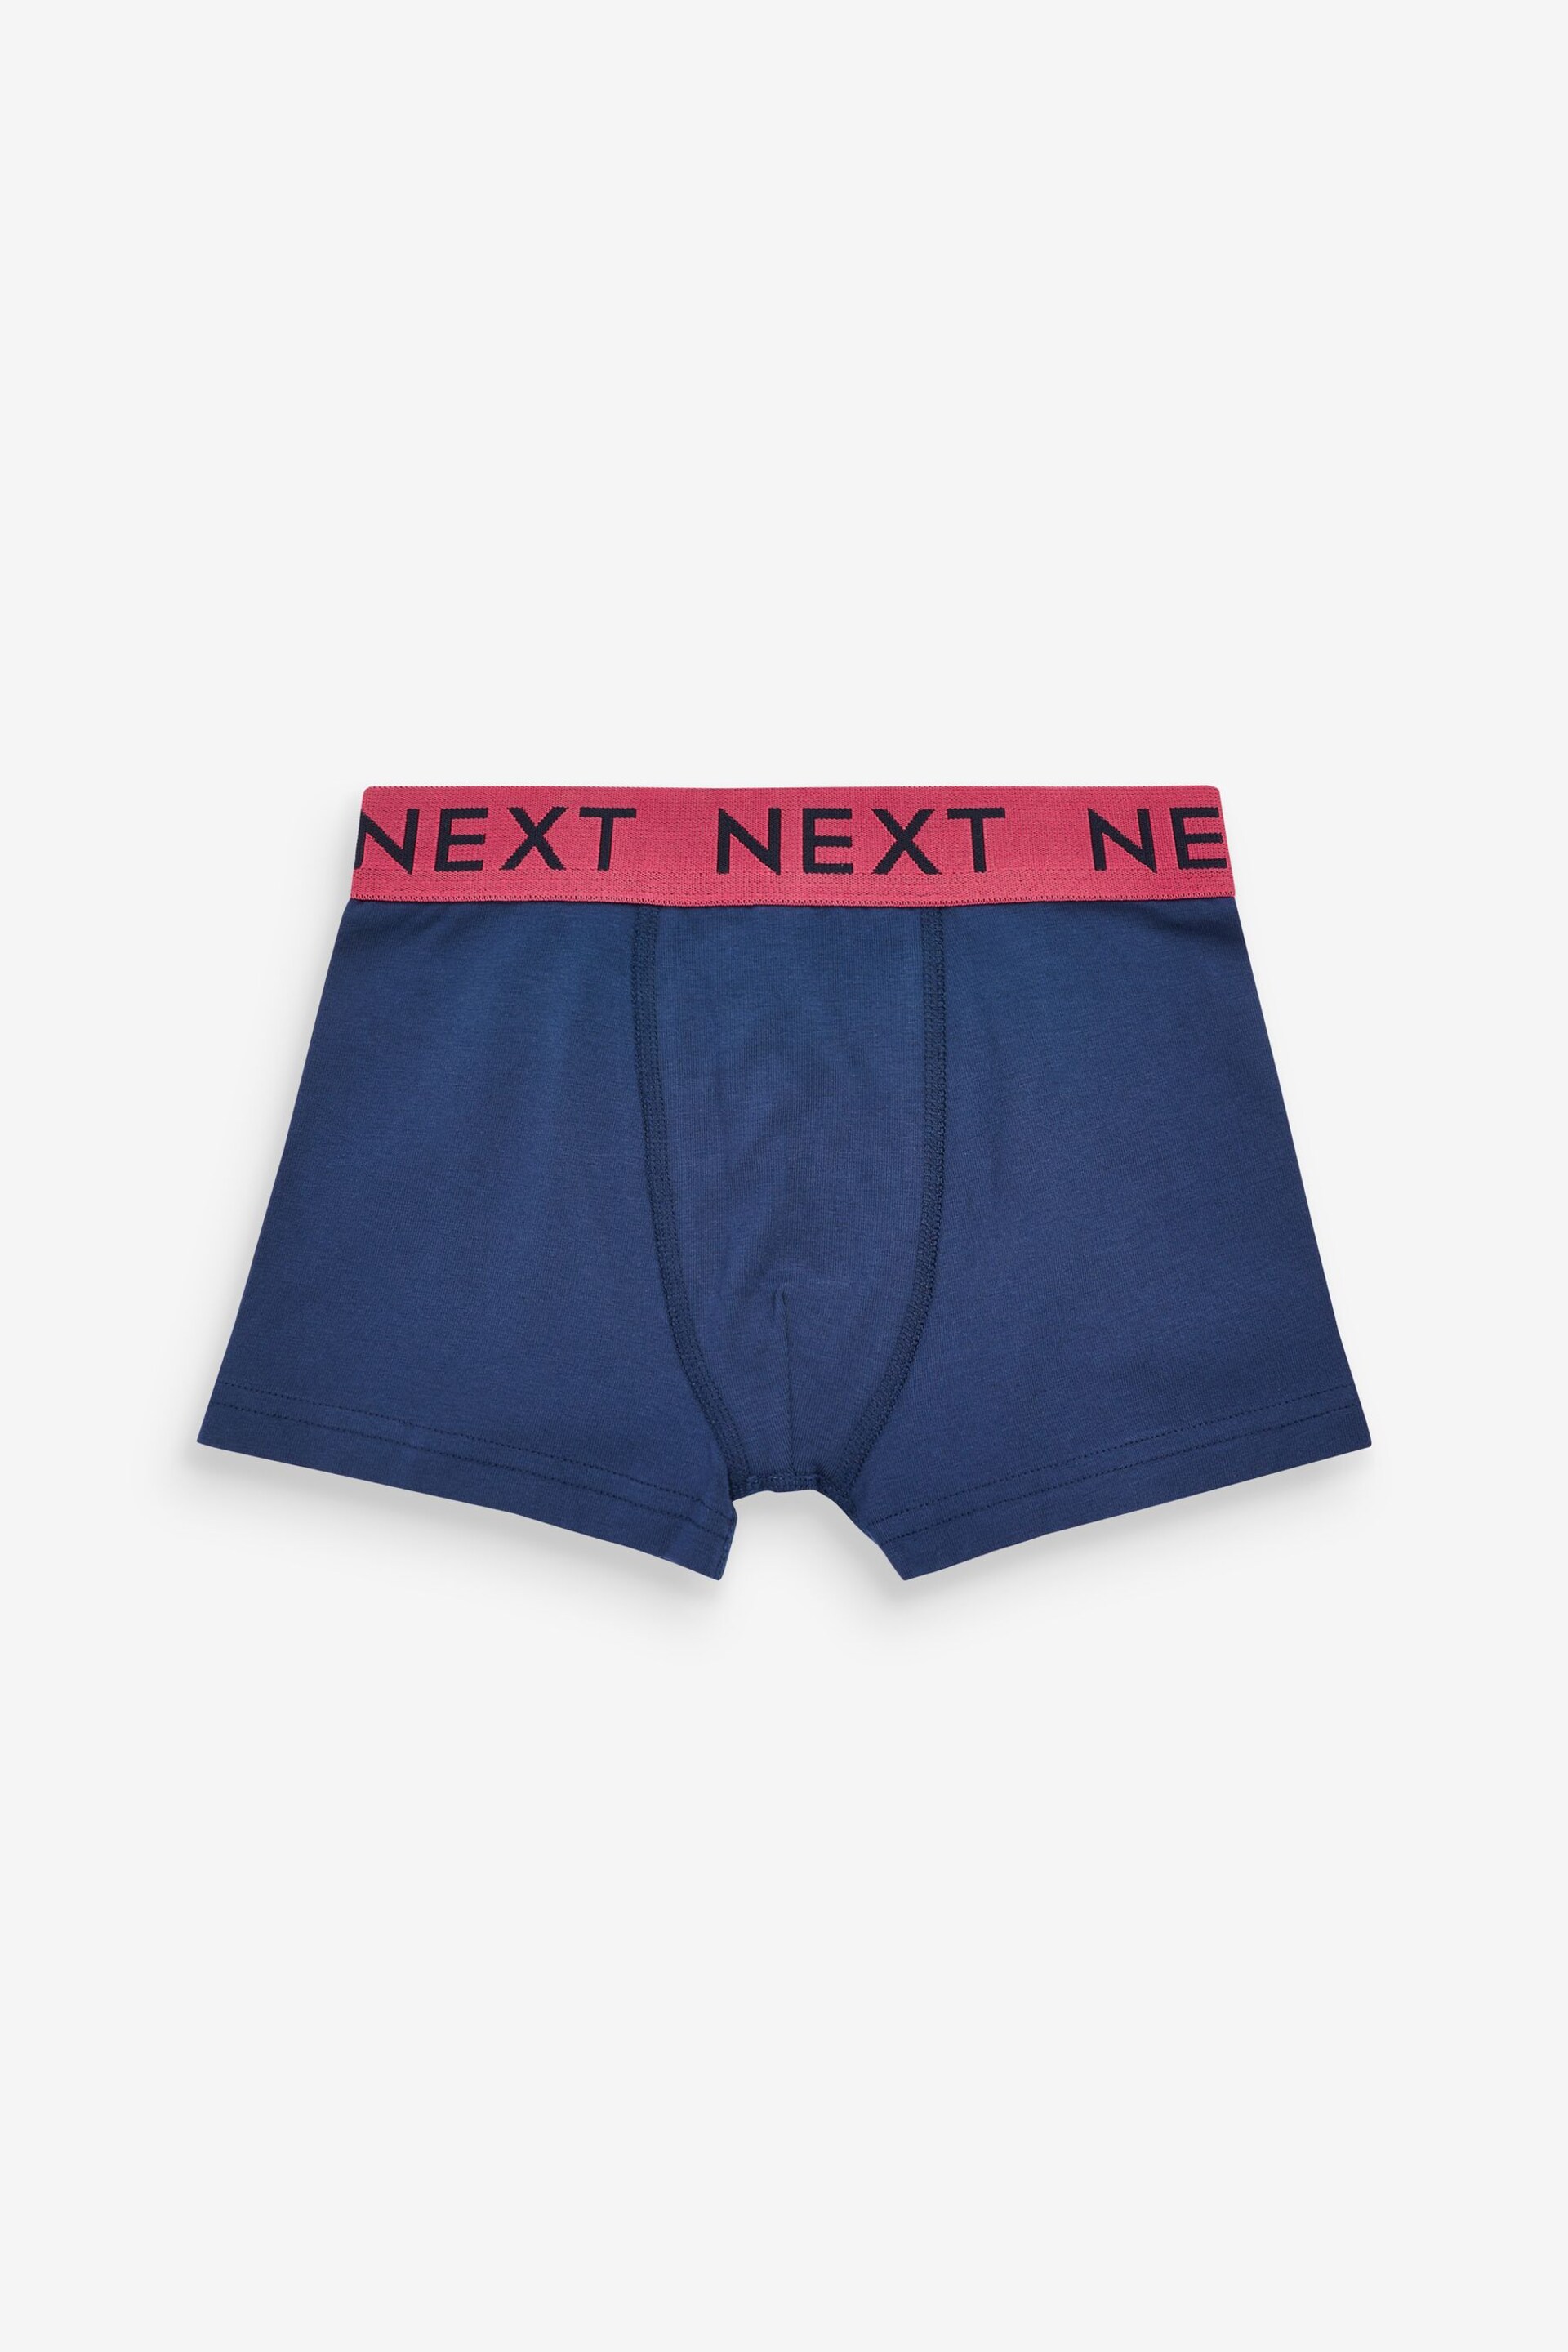 Navy Bright Waistband Trunks 10 Pack (1.5-16yrs) - Image 10 of 11